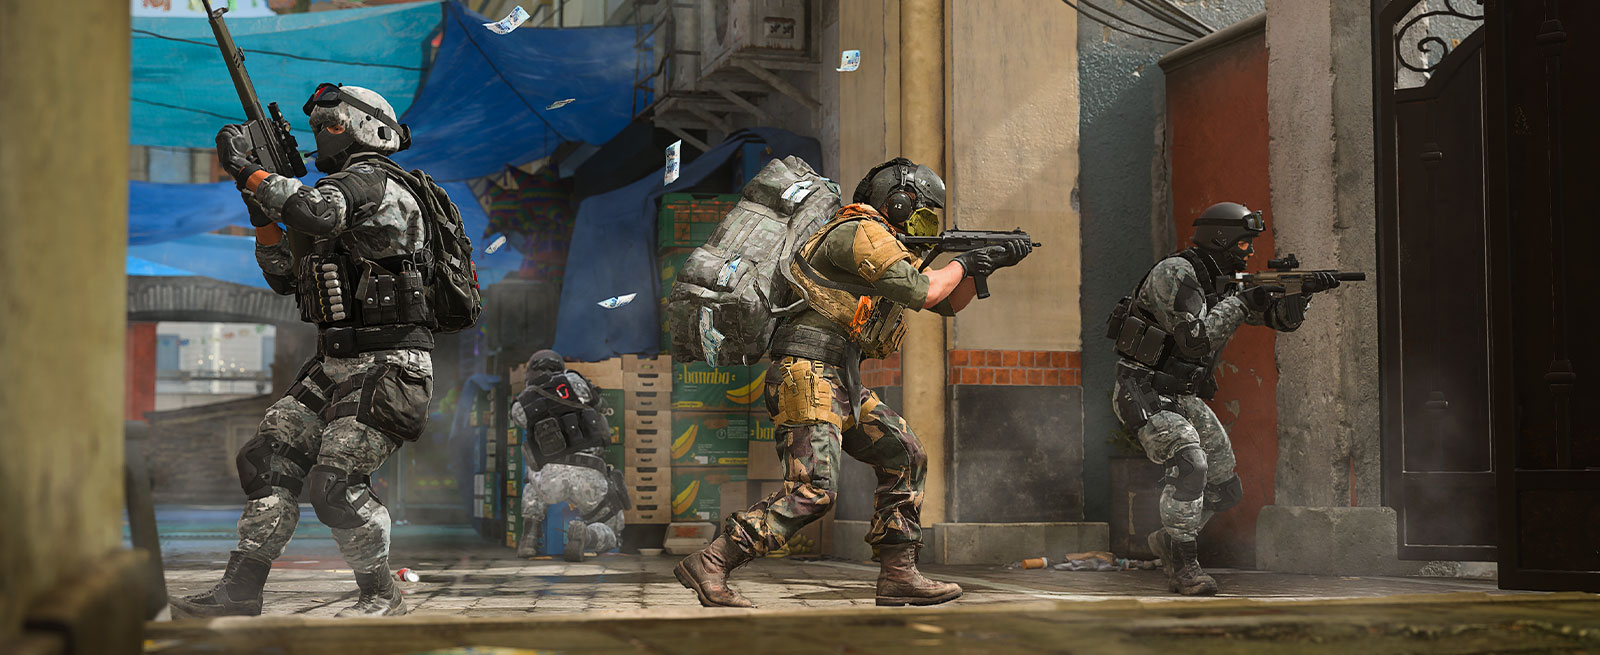 Four Operators advance towards a gate under the cover of an empty street market.